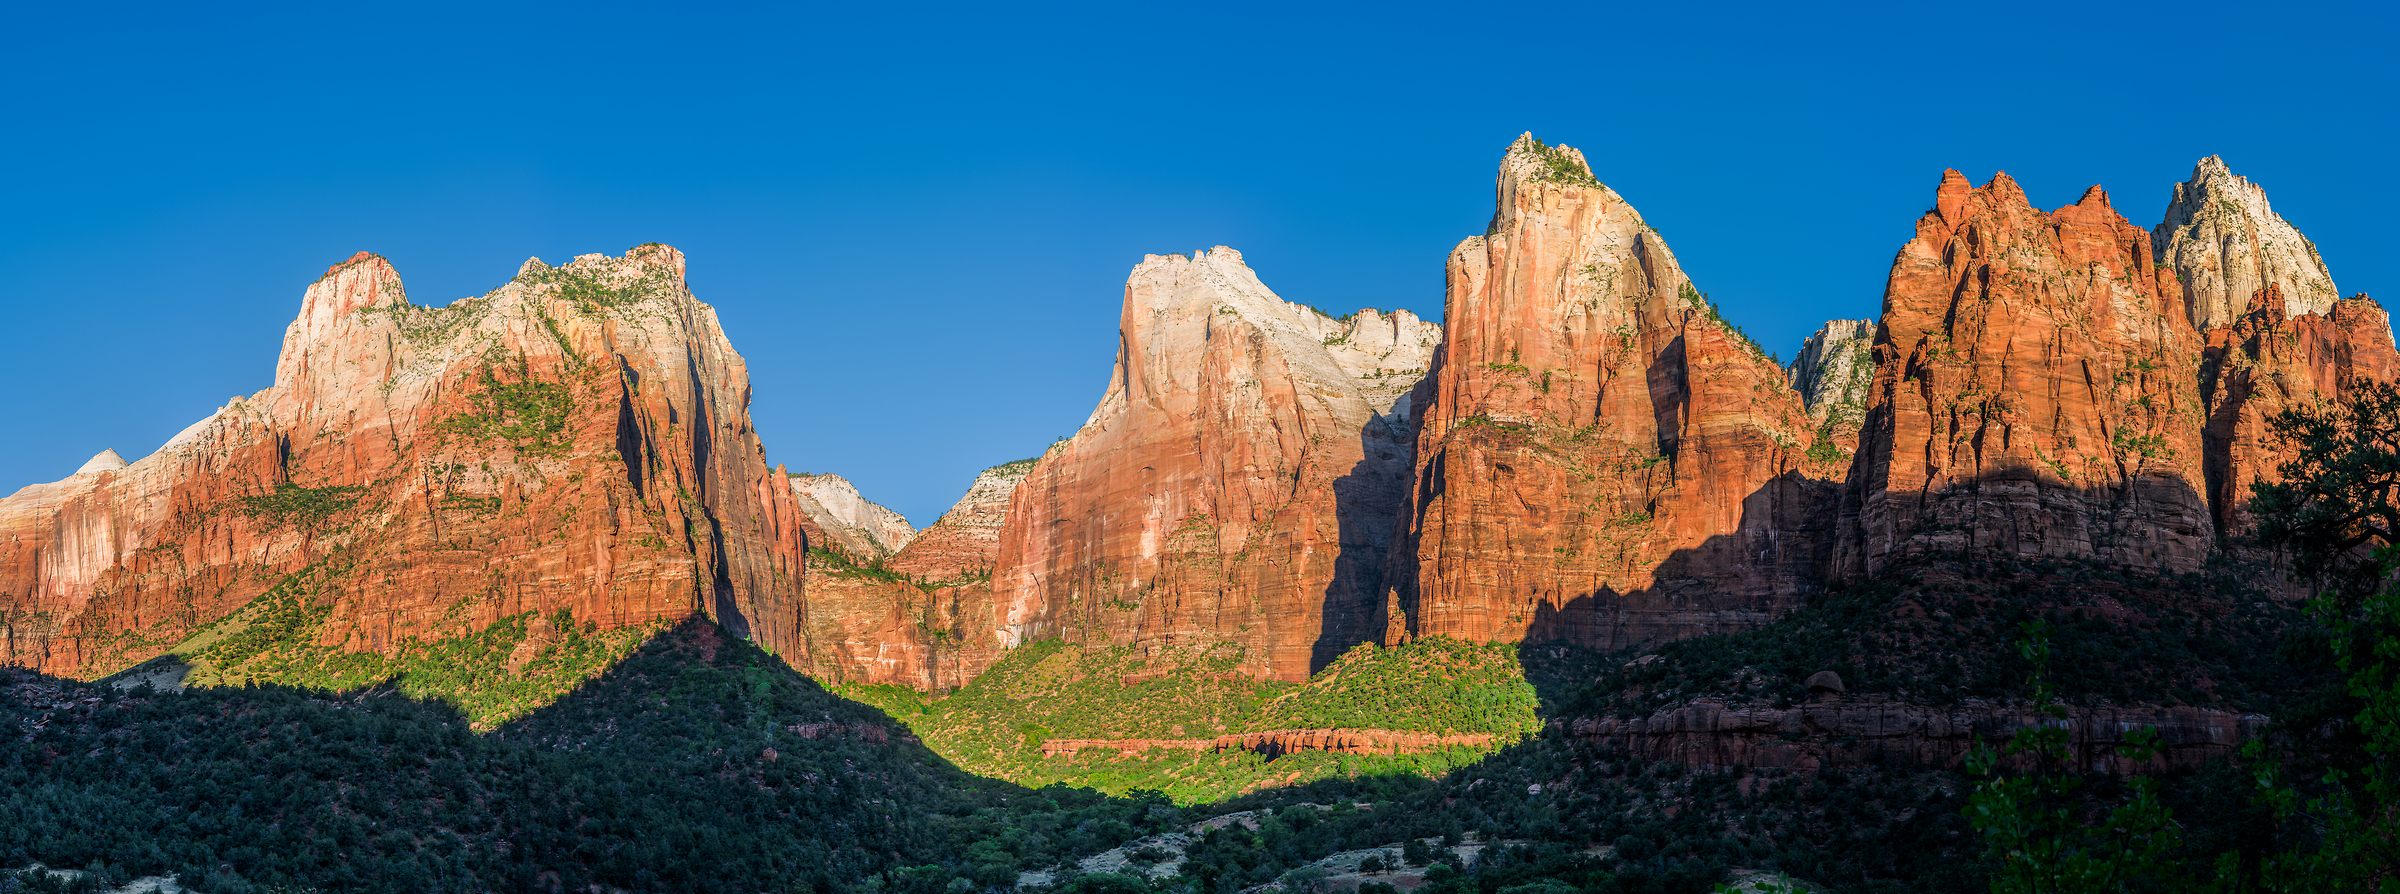 410 megapixels! A very high resolution, large-format landscape photo perfect for a large-format wall covering; landscape photogrpah created by Jim Tarpo in Zion National Park, Utah